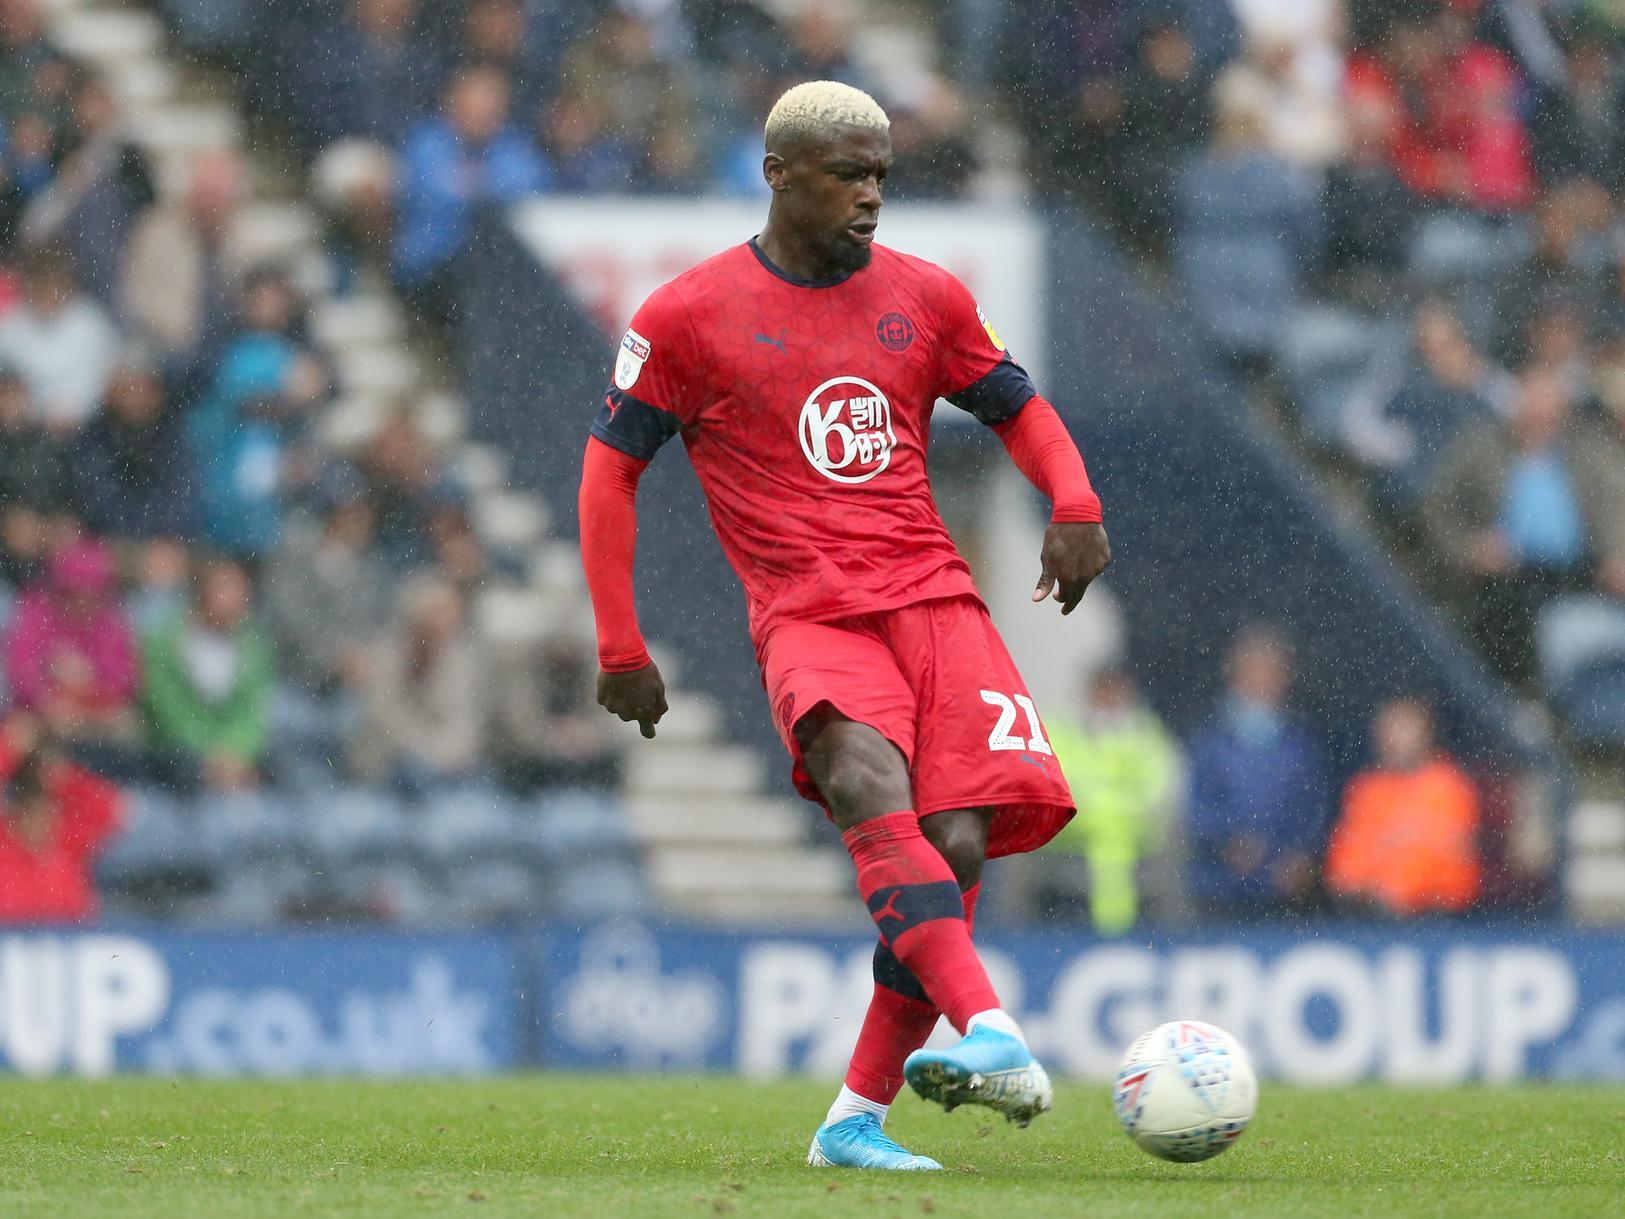 Wigan's revival continued with a huge 1-0 away win against league leaders West Brom. Central to the result was Latics' heroic defence - Cedric Kipre in particular shone, with six clearances, four interceptions, and two tackles.